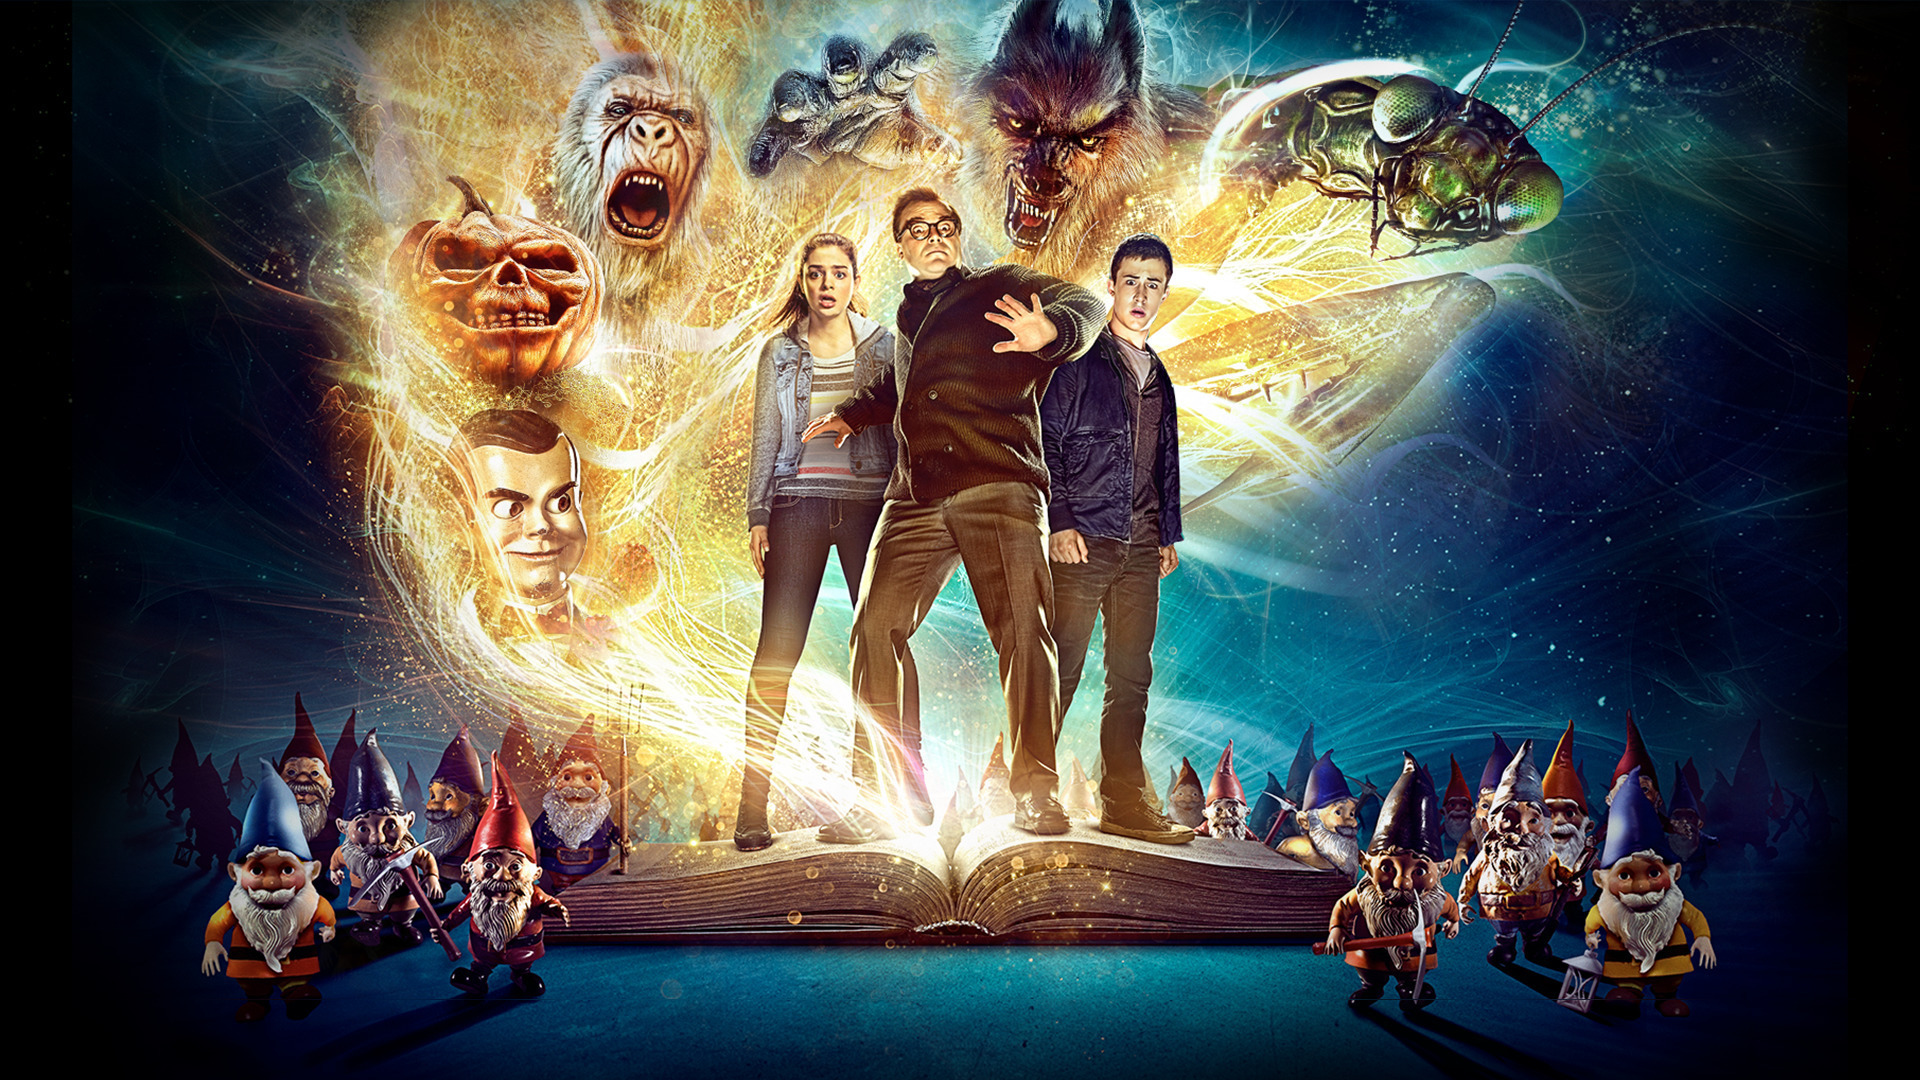 Movie Wallpaper And Backdrops For Goosebumps